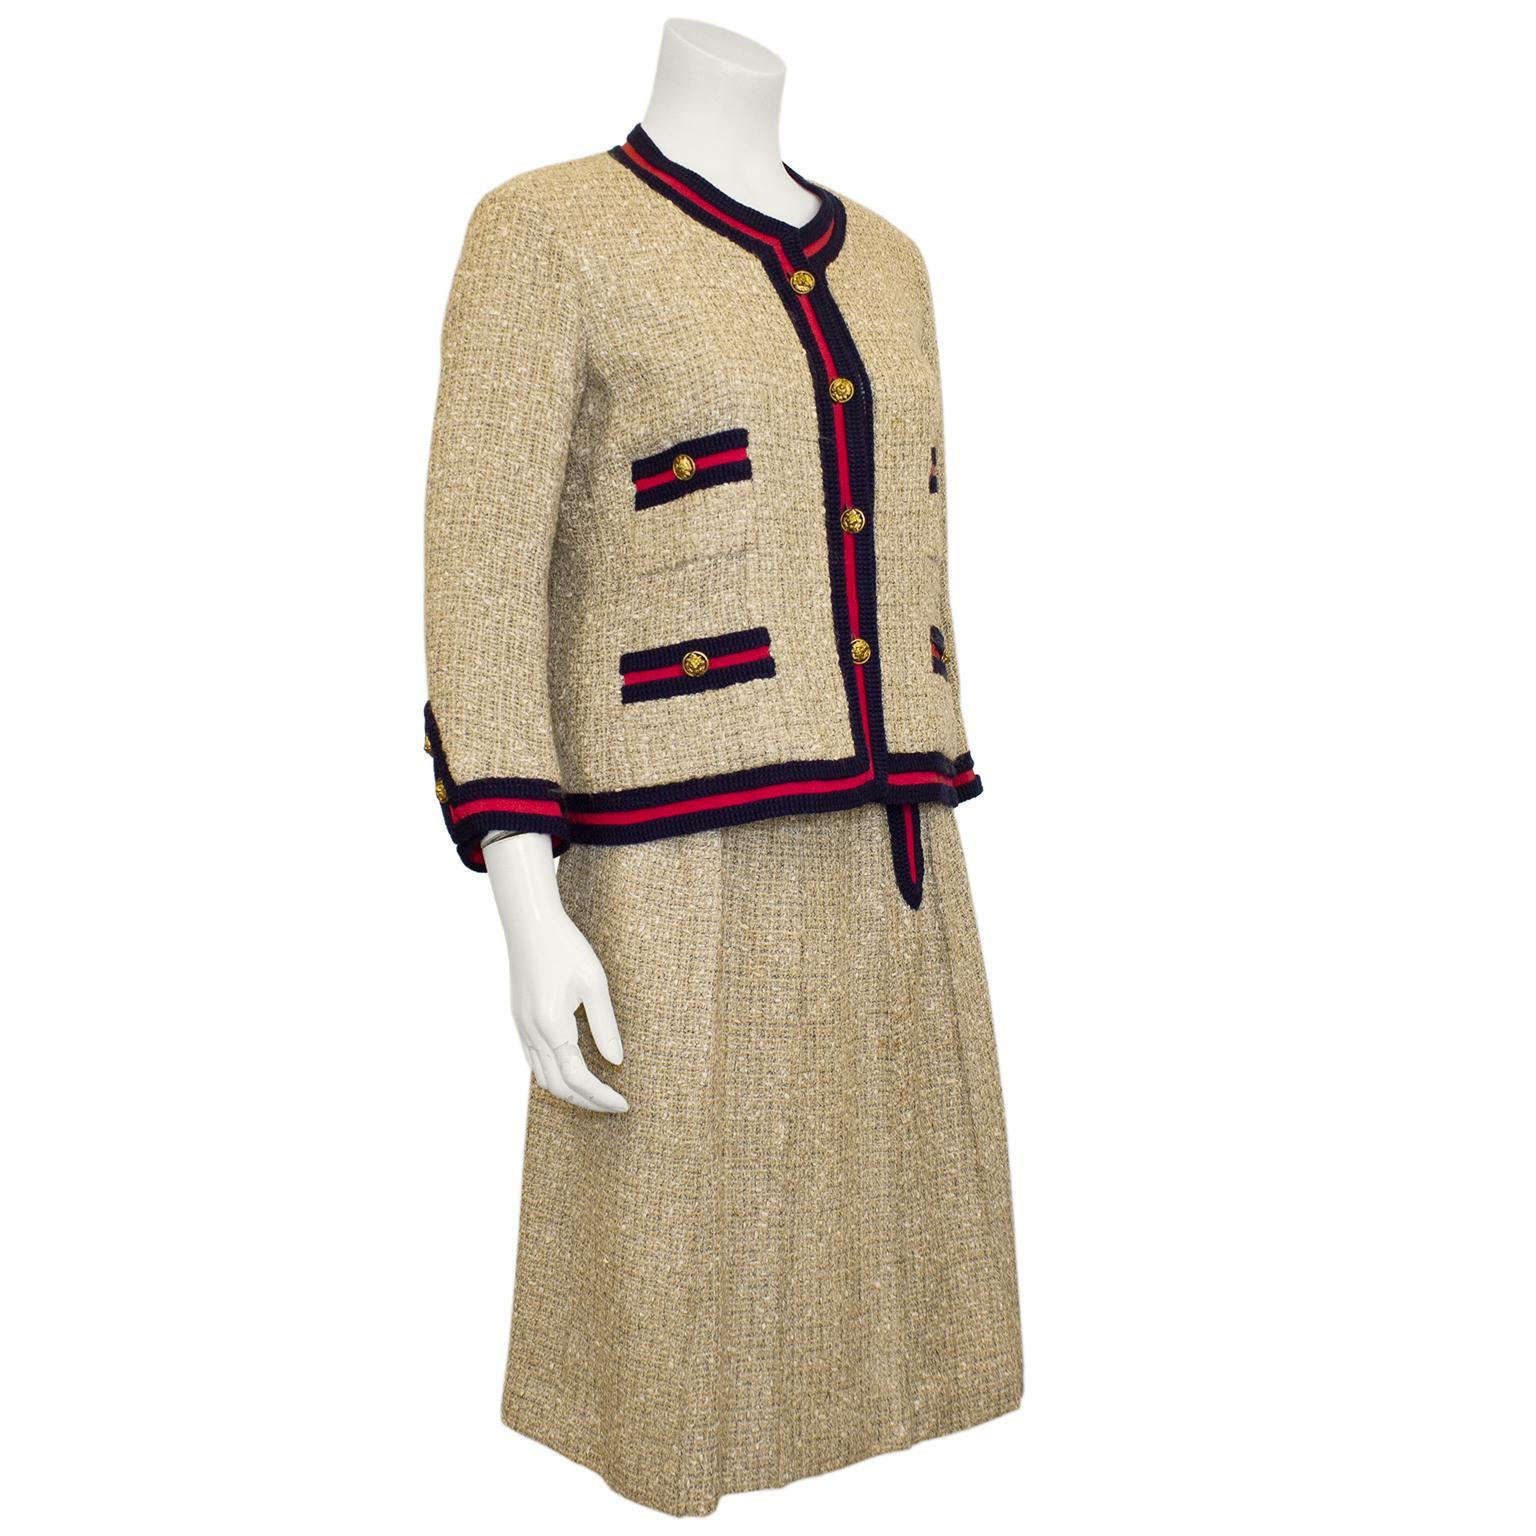 IT DOES NOT GET MORE ICONIC than this 1961 beige woven linen tweed skirt suit trimmed in raspberry red grosgrain ribbon and navy crochet border. This version was made exclusively for Holt Renfrew Canada. The same collection suit was worn by